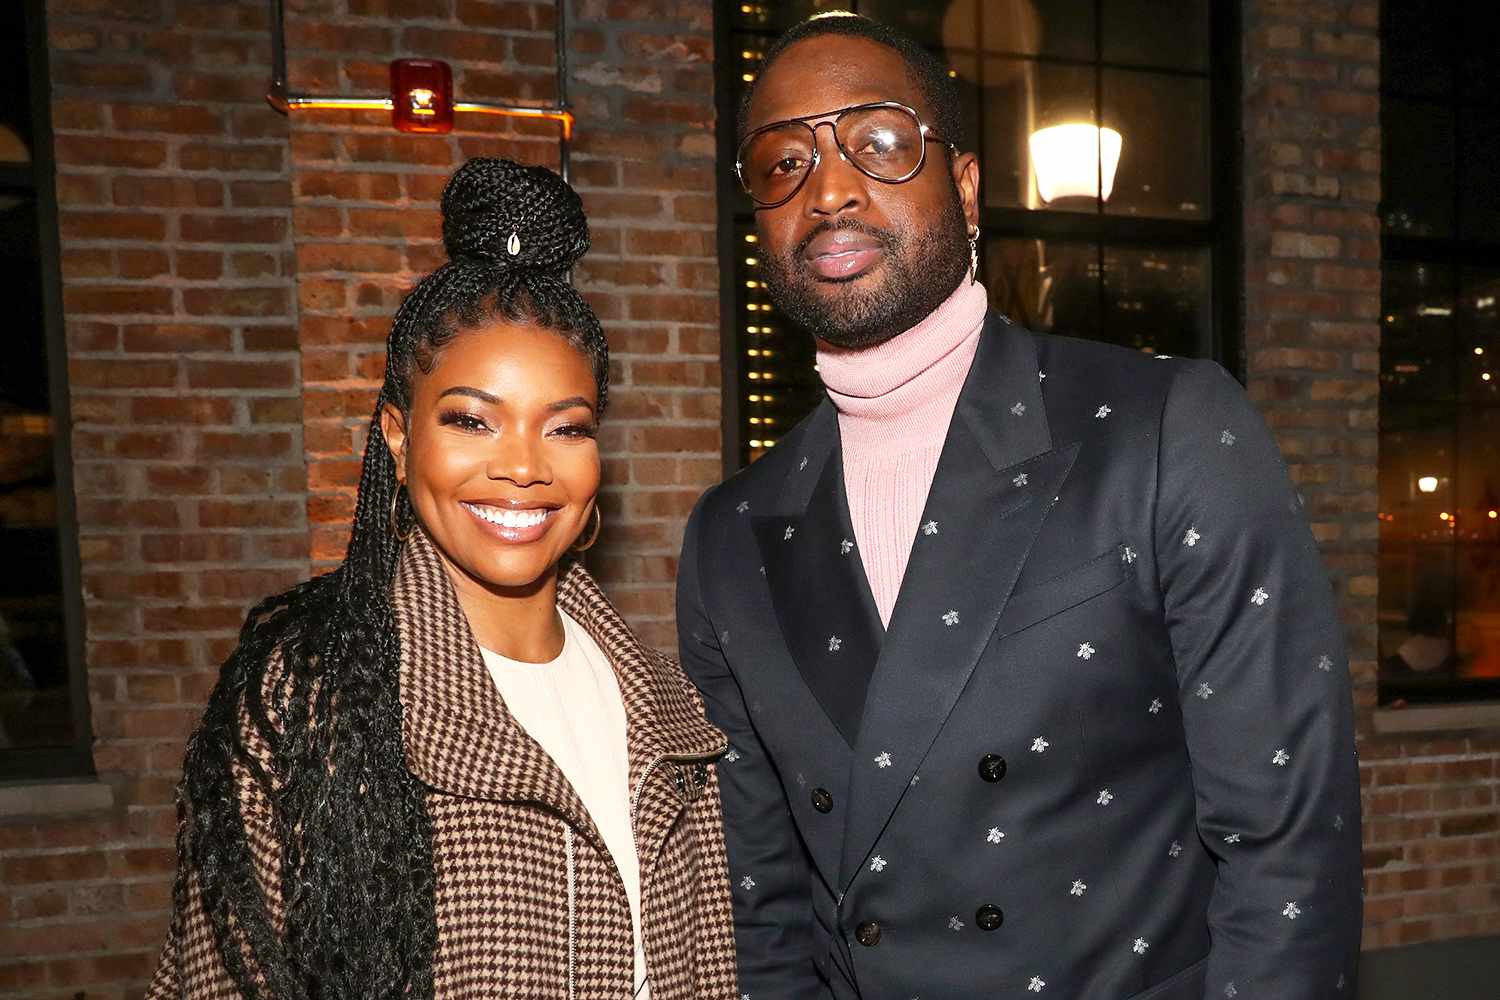 What is the age difference between dwyane wade and gabrielle union?